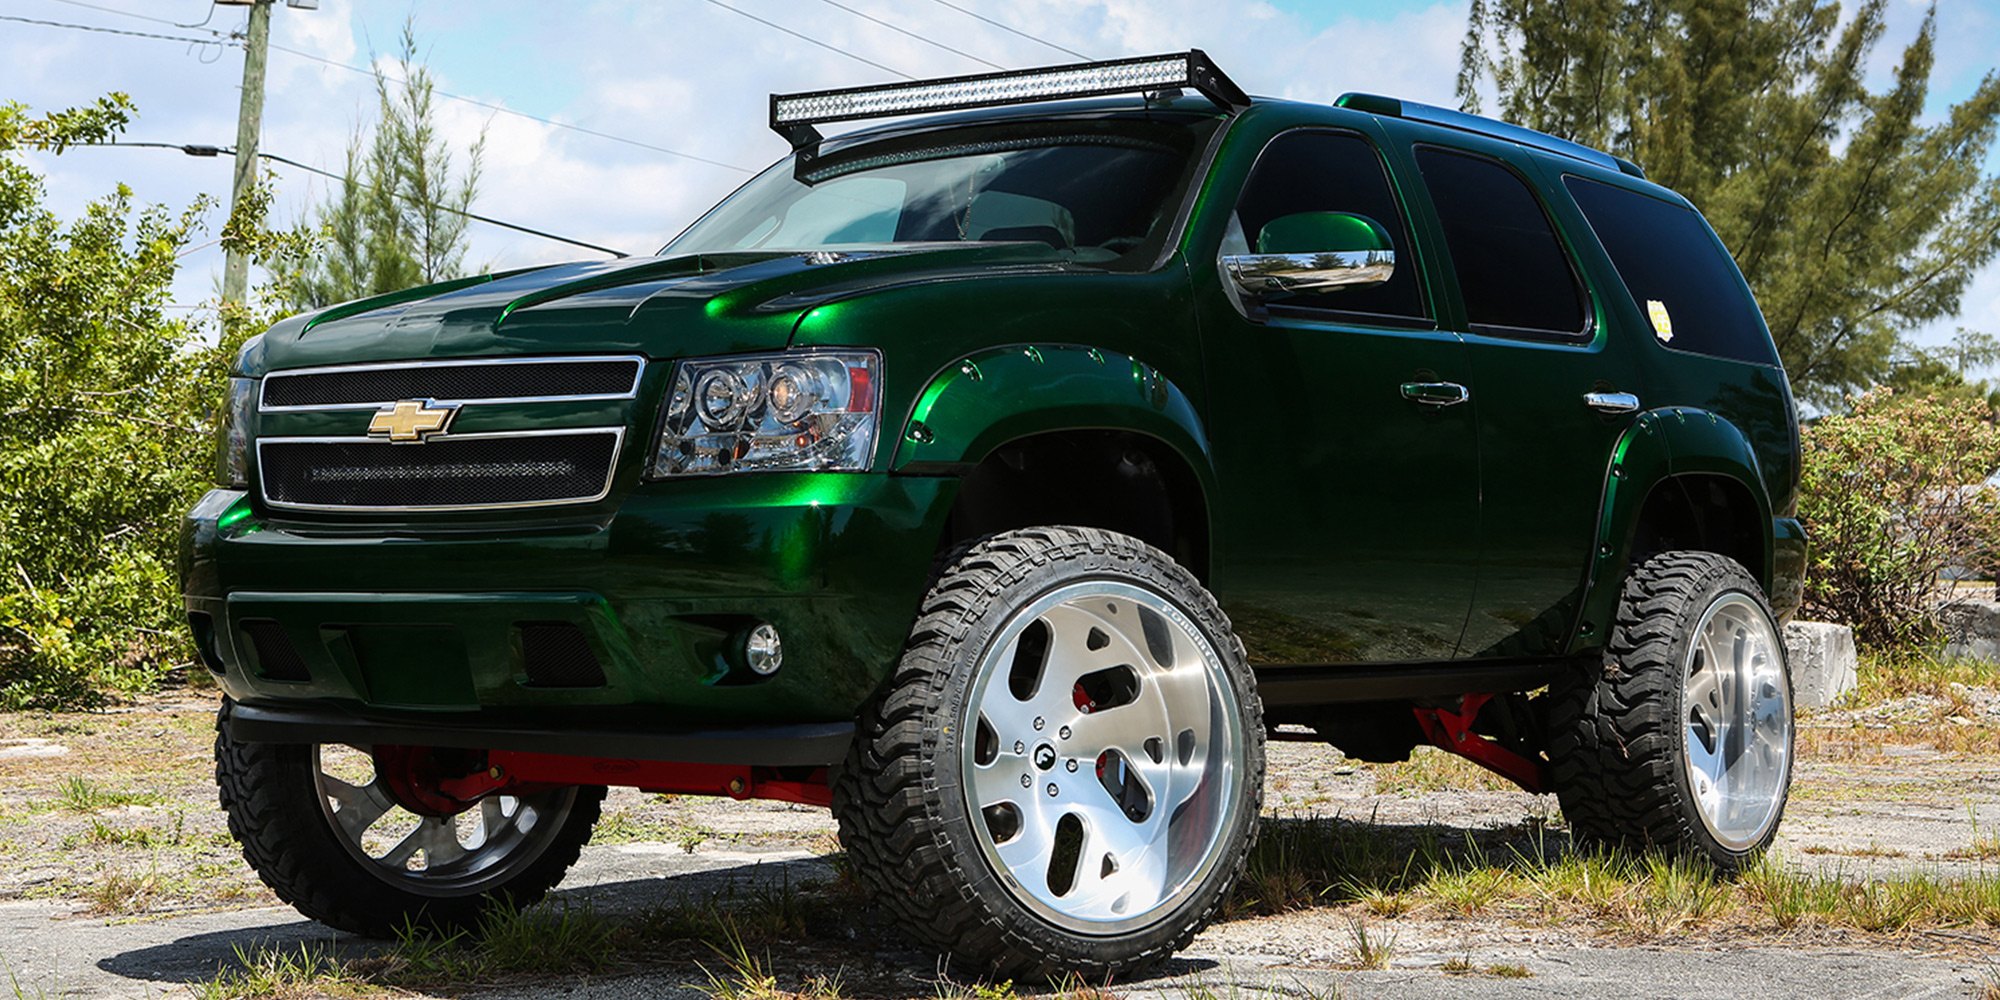 Chevy Tahoe in Purple Green Color with Offorad mods - Photo by Forgiato